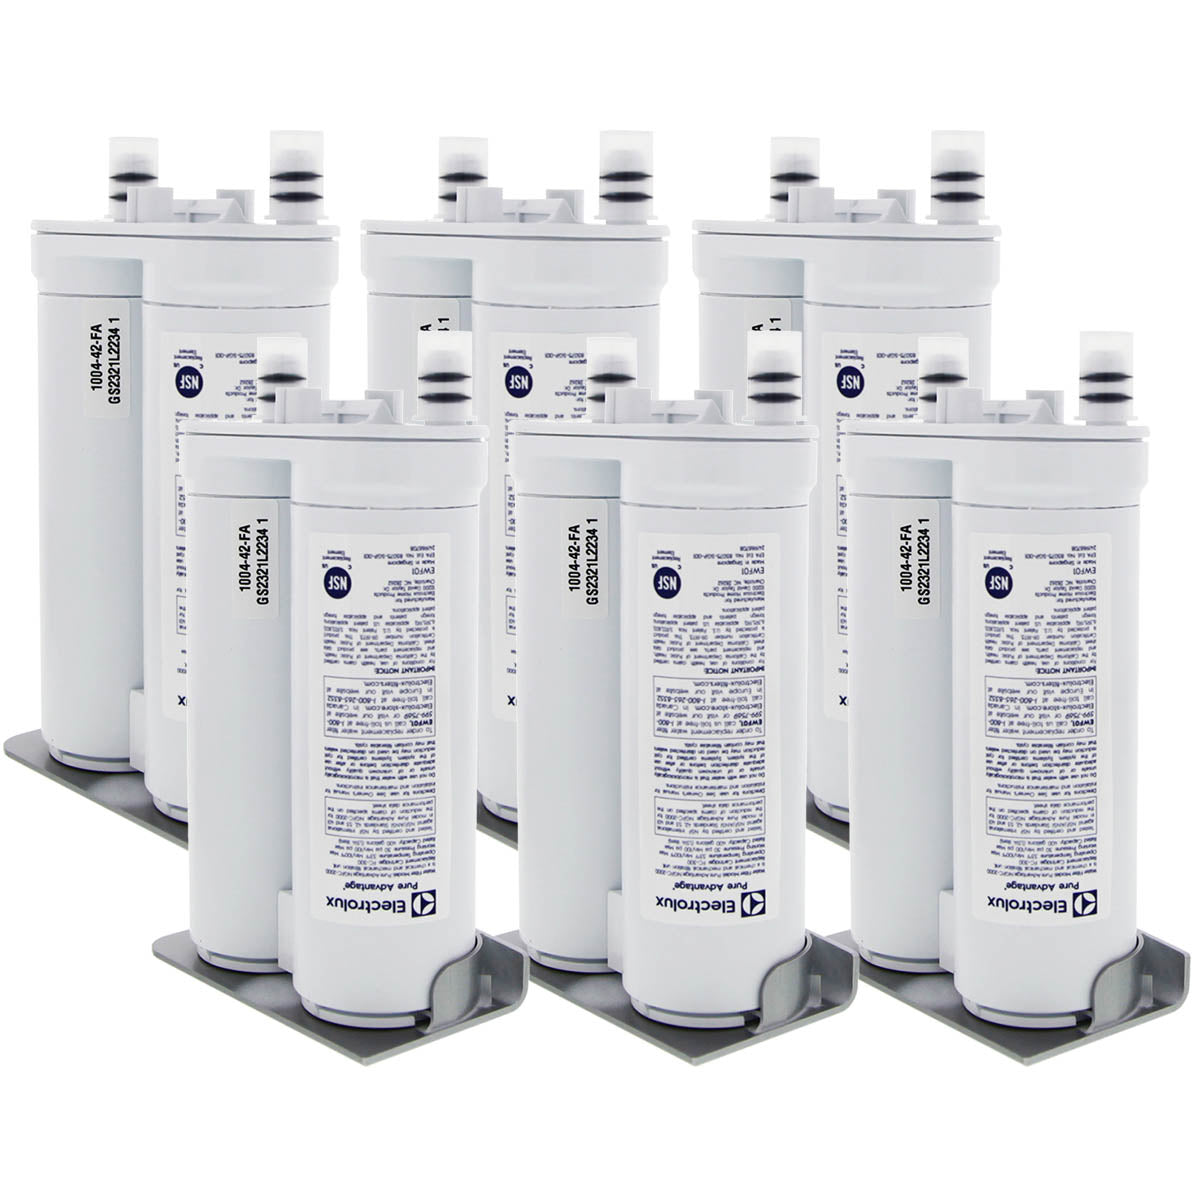 Electrolux EWF01 Pure Advantage Refrigerator Water Filter